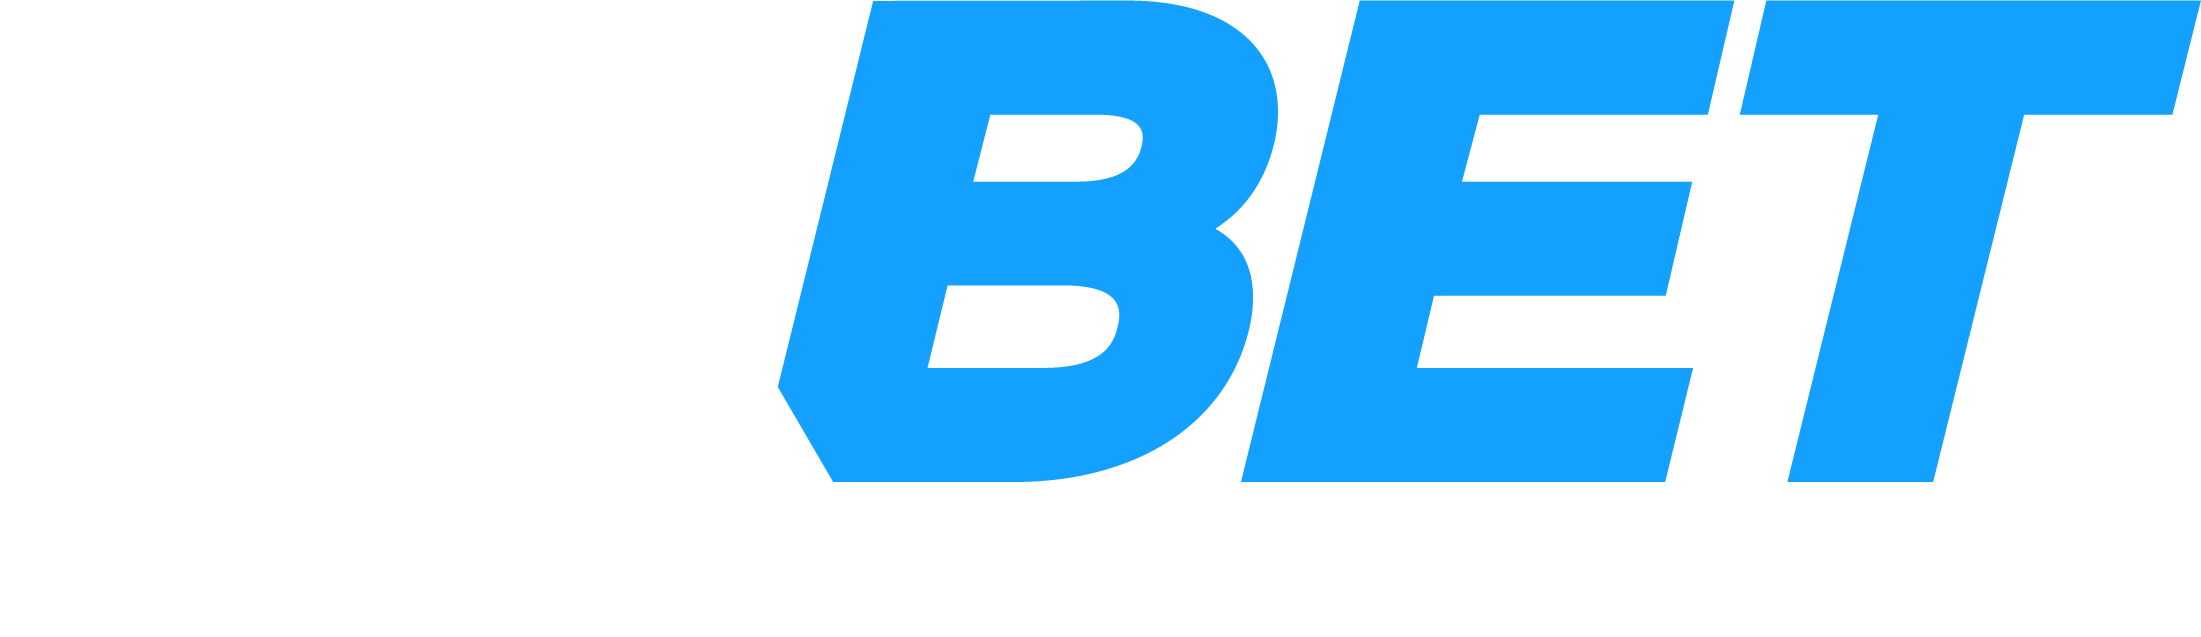 1xBet App Mobile - Android and iOS